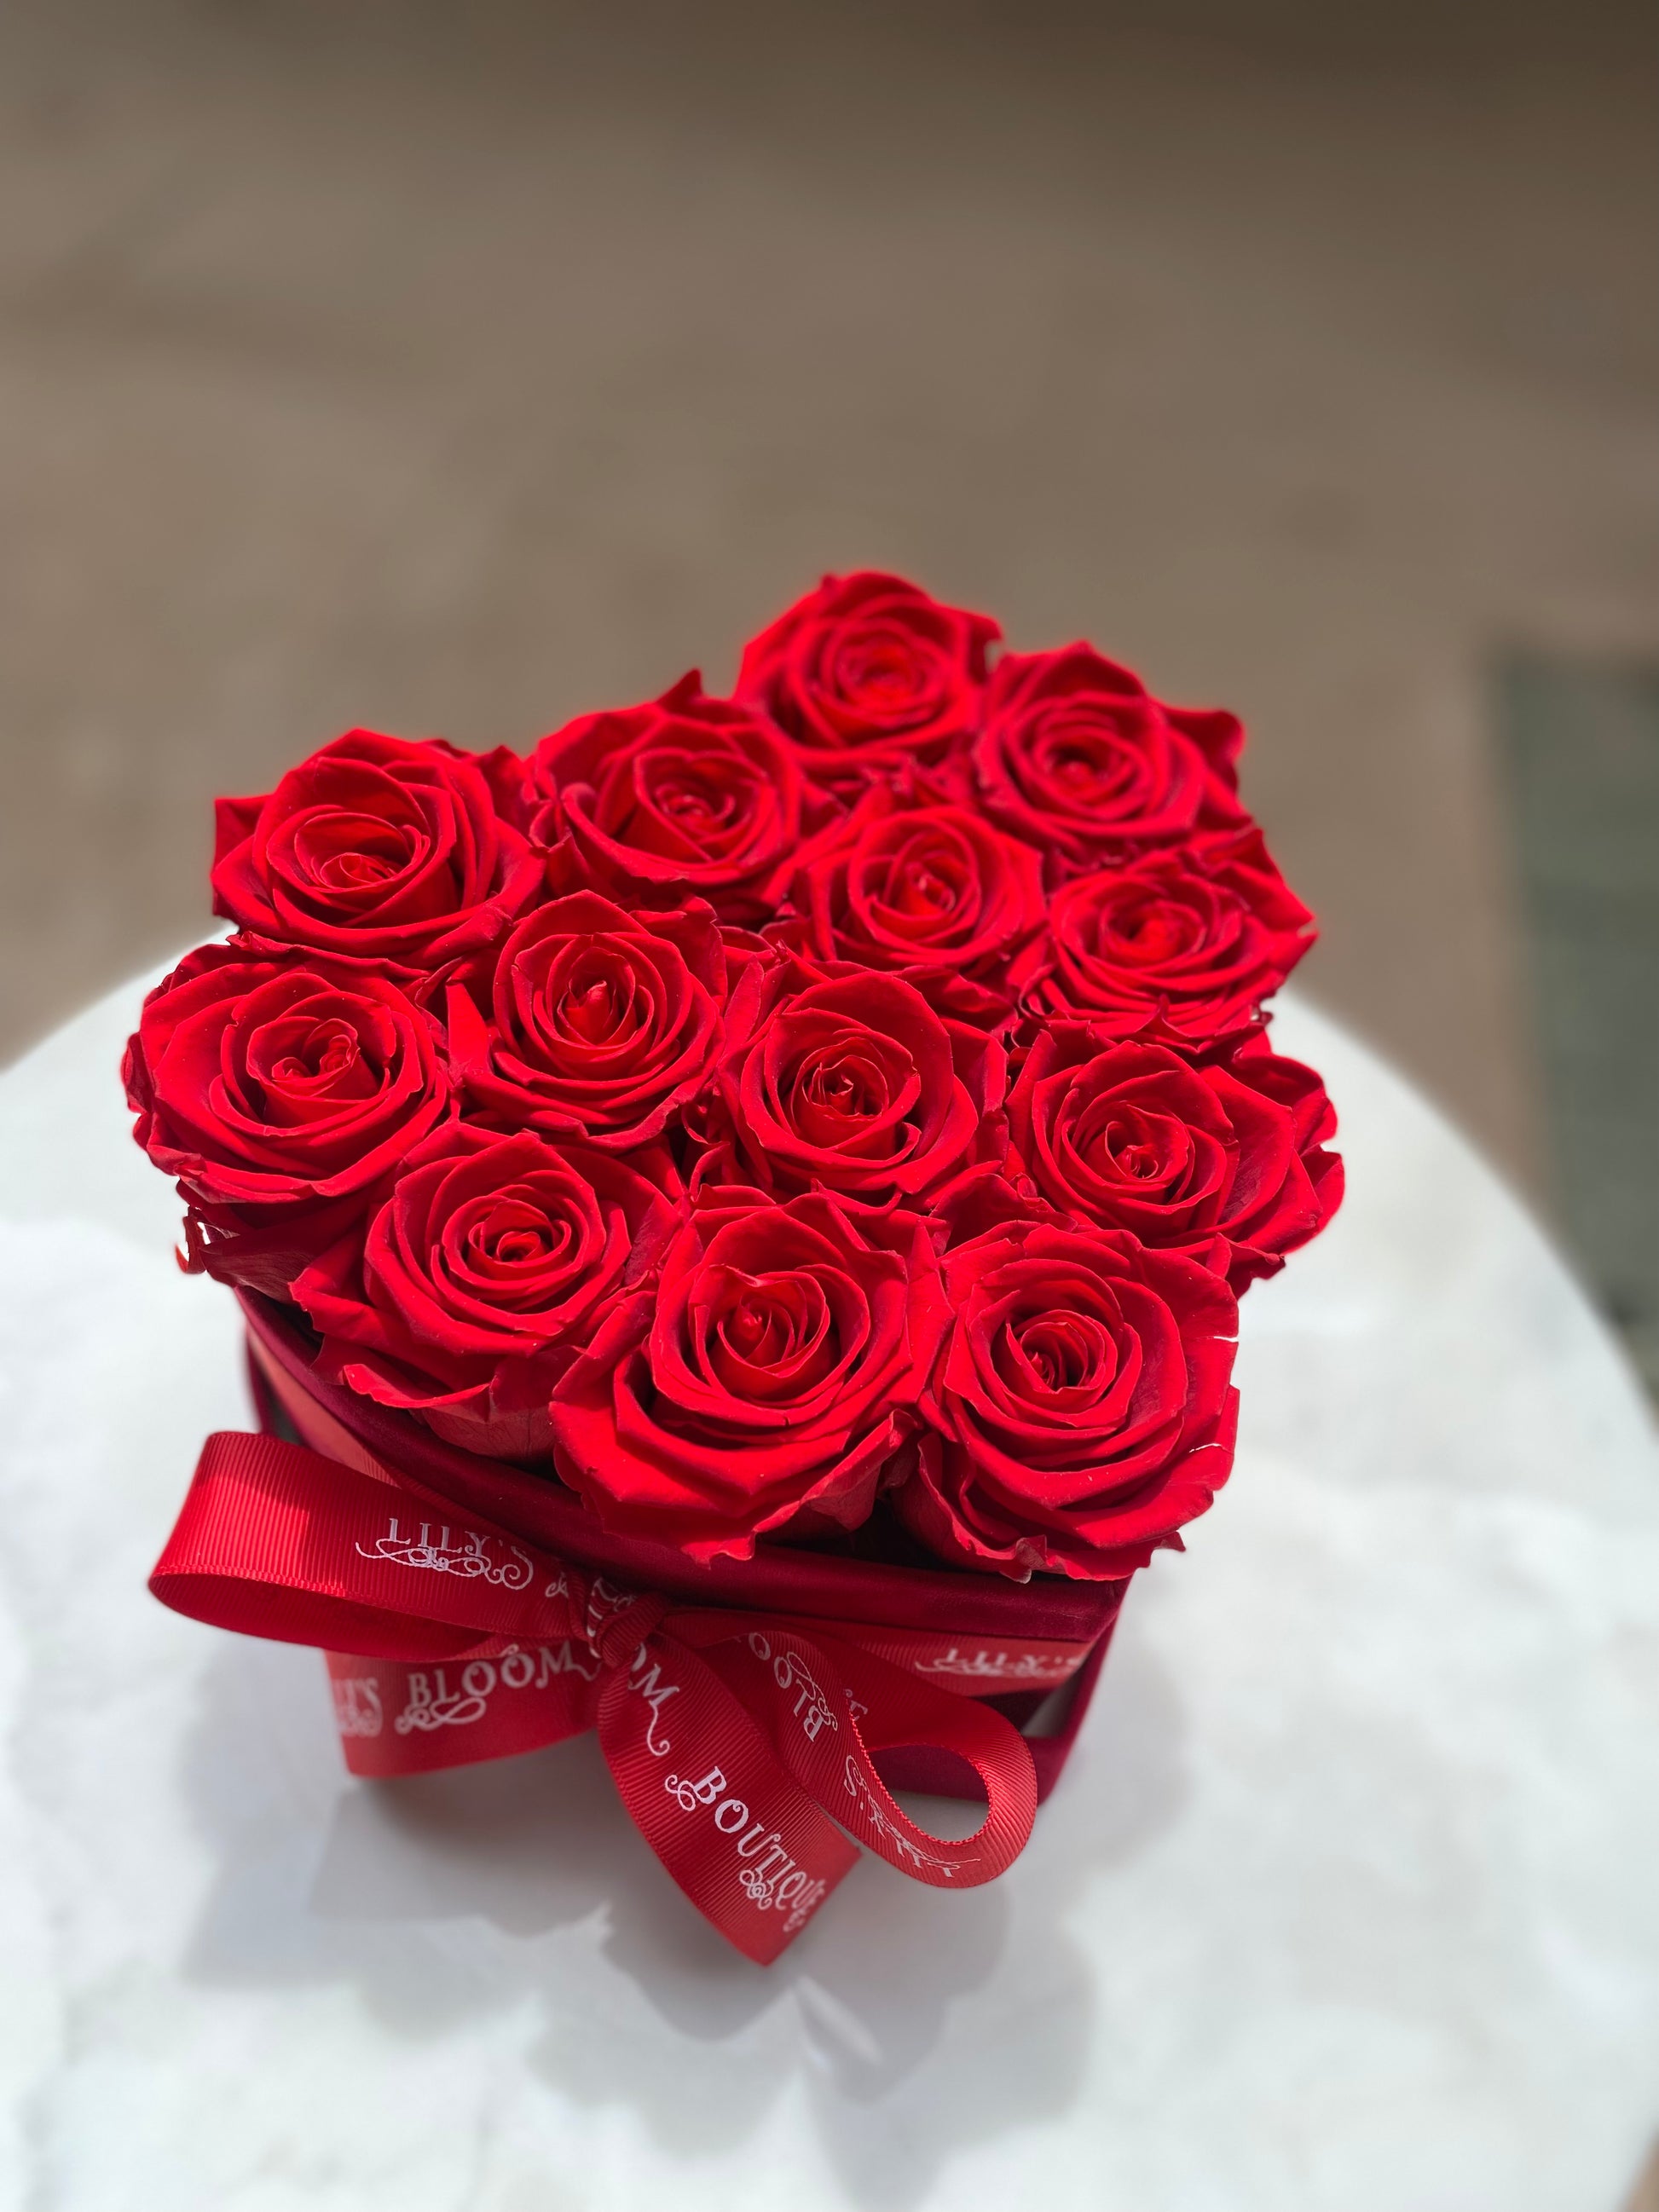 Red Roses in a box with red Ribbon on a table